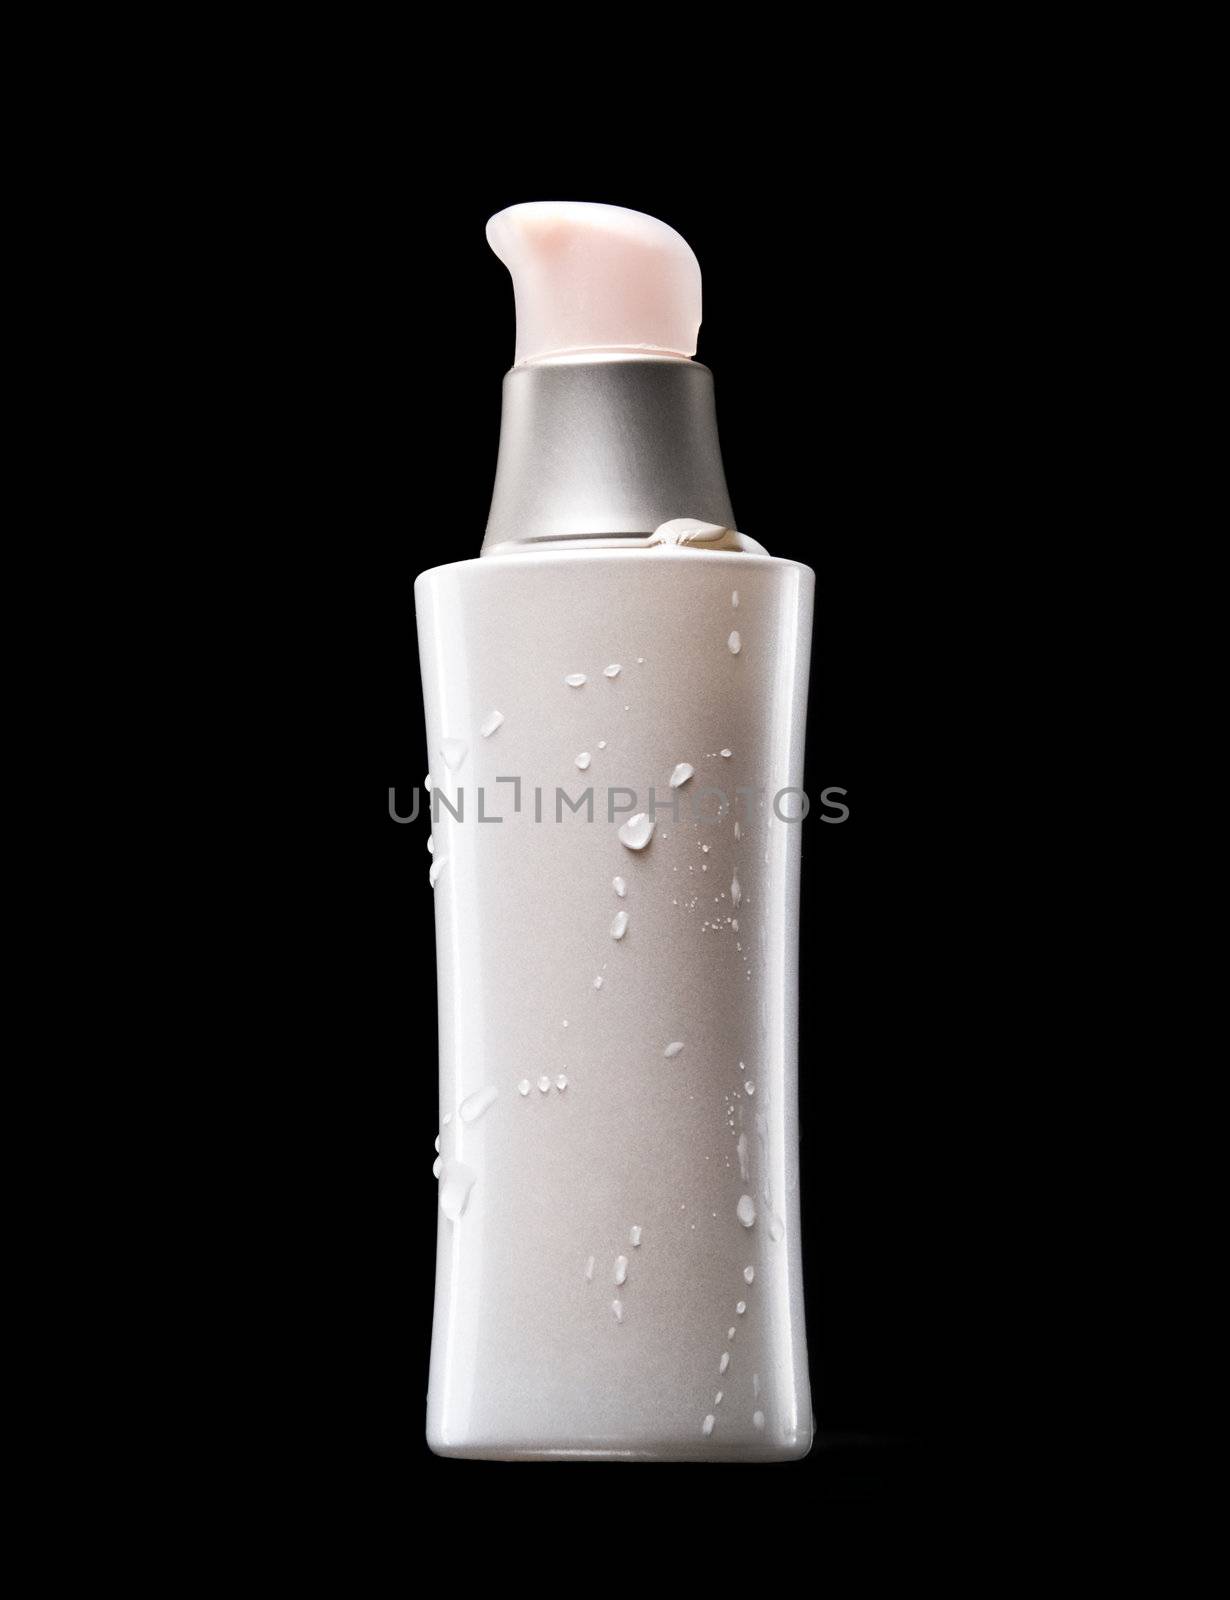 White bottle of cometics with pink covers and water drops on a black background